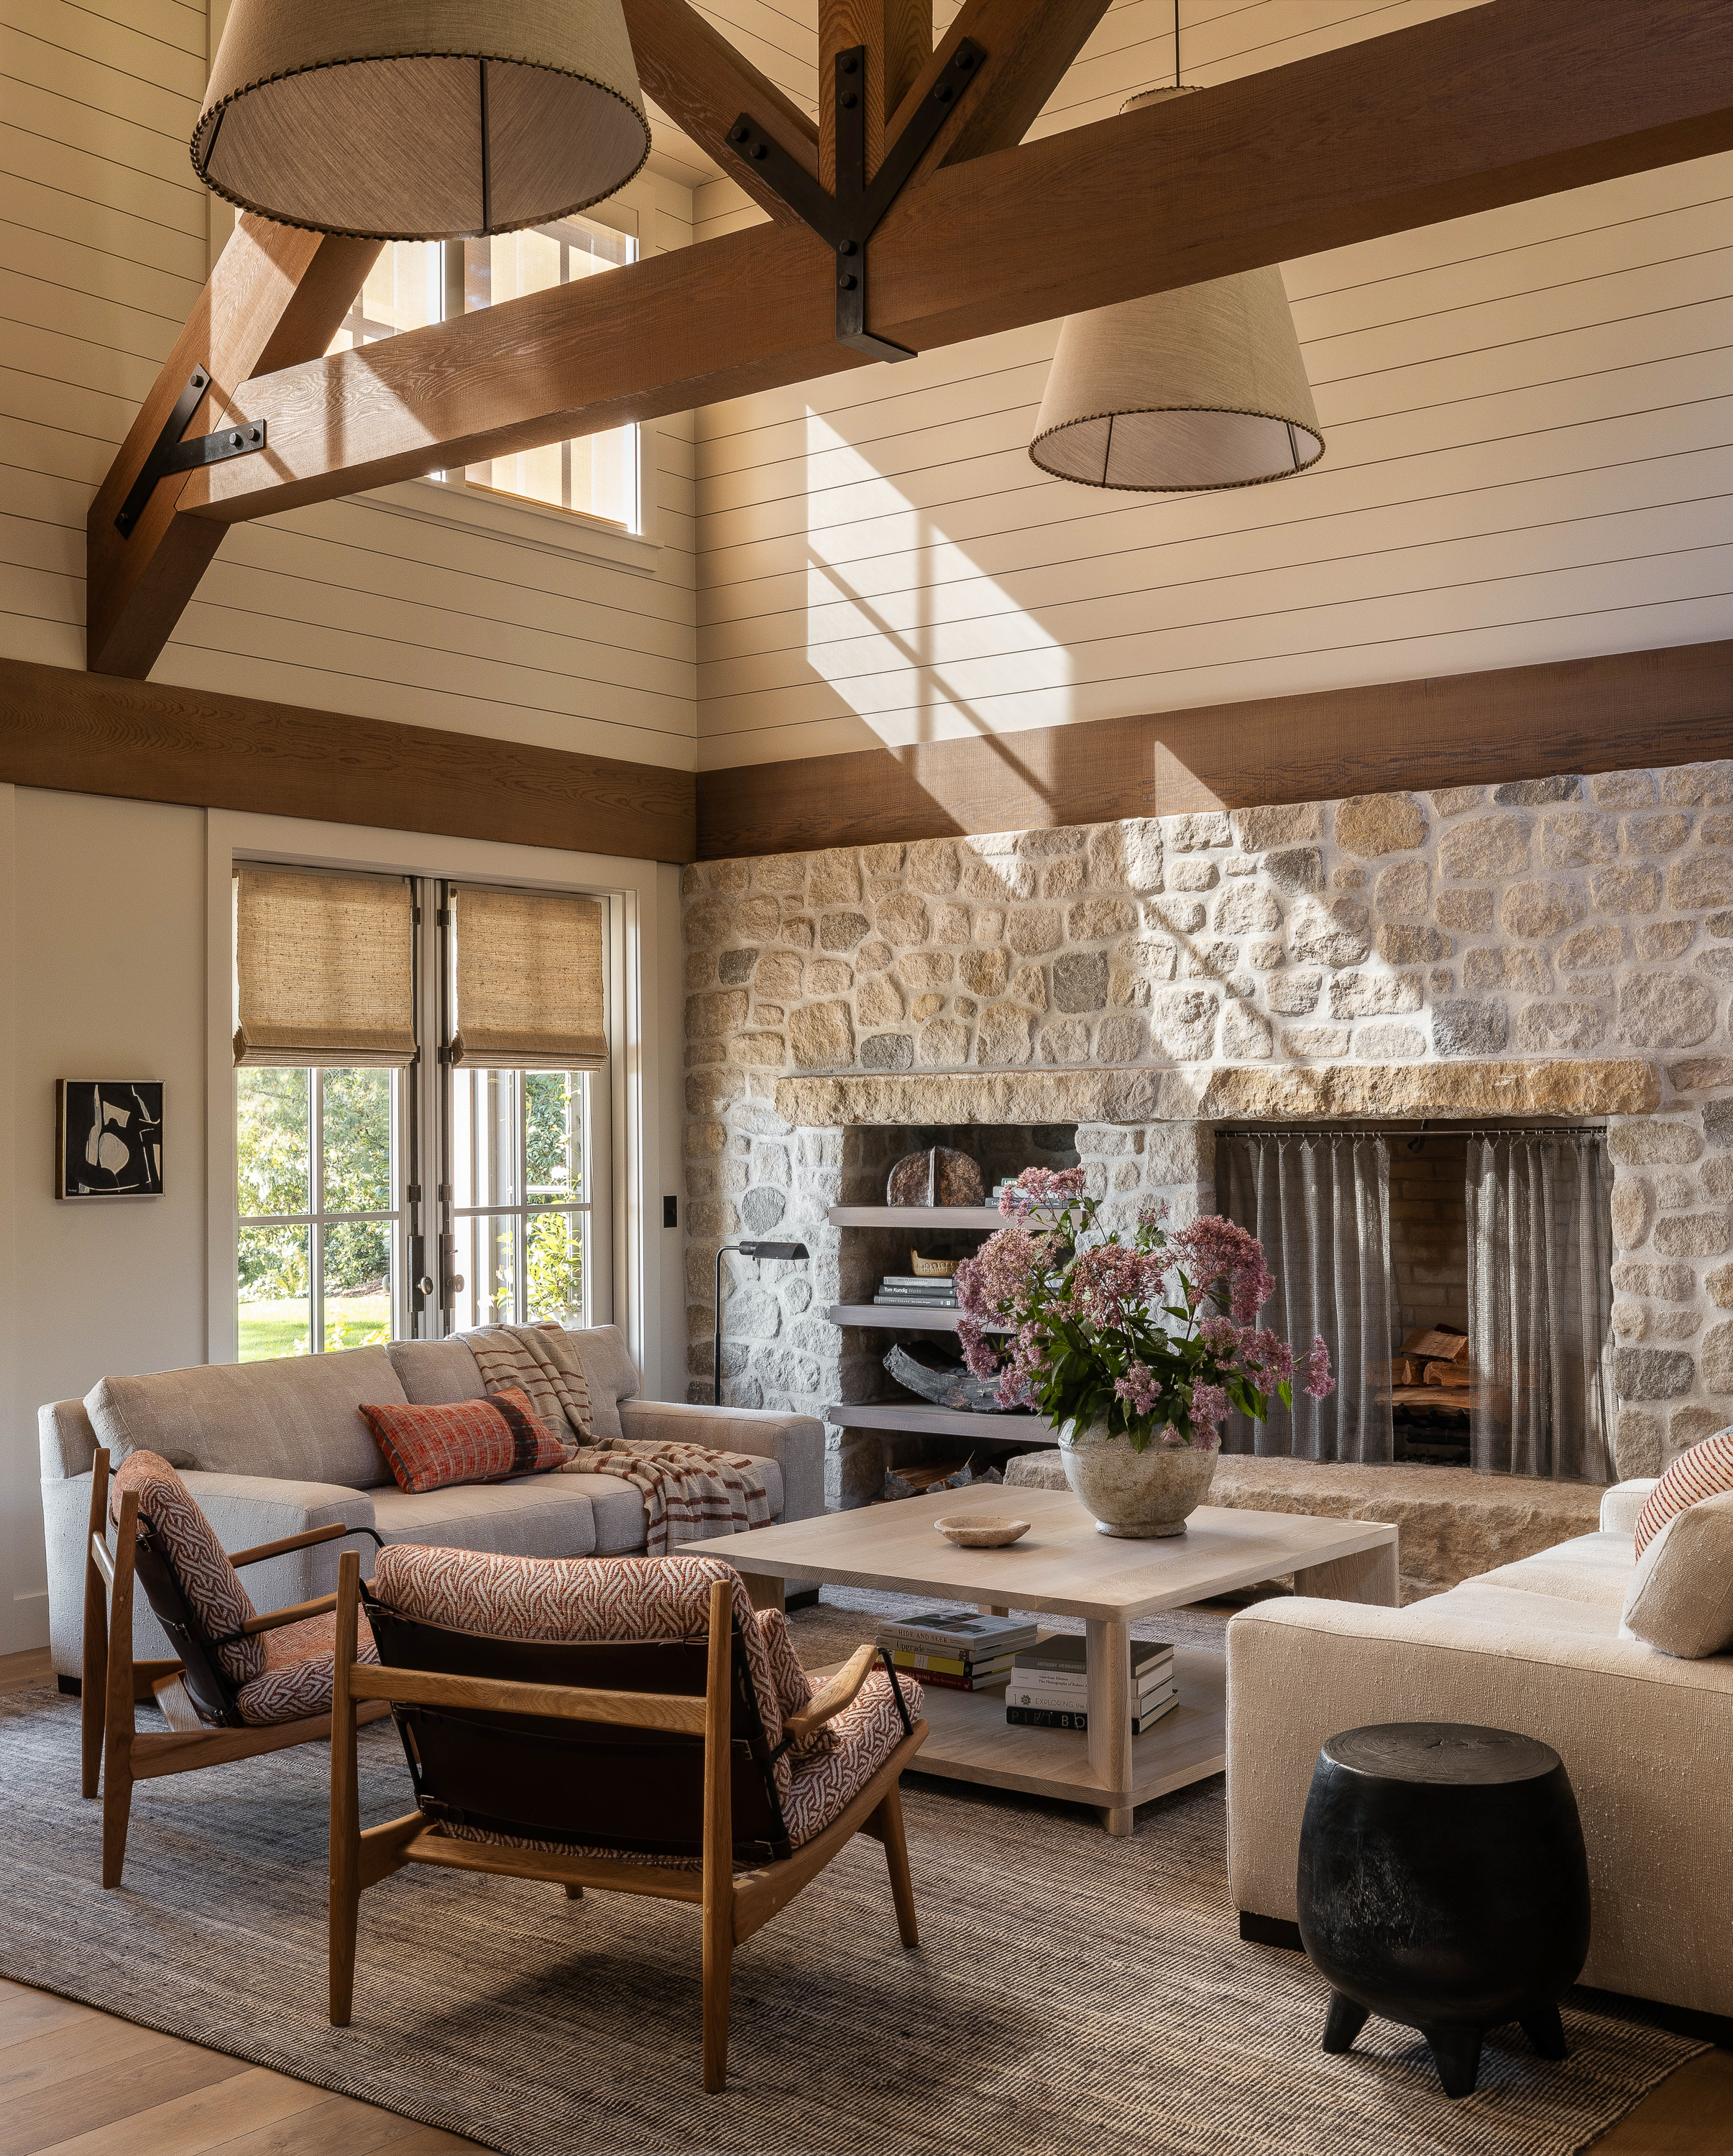 A shot capturing the high ceilings in the living room, highlighting the intricate timber trusses and stunning large-scale custom pendants creating an inviting and impressive atmosphere.